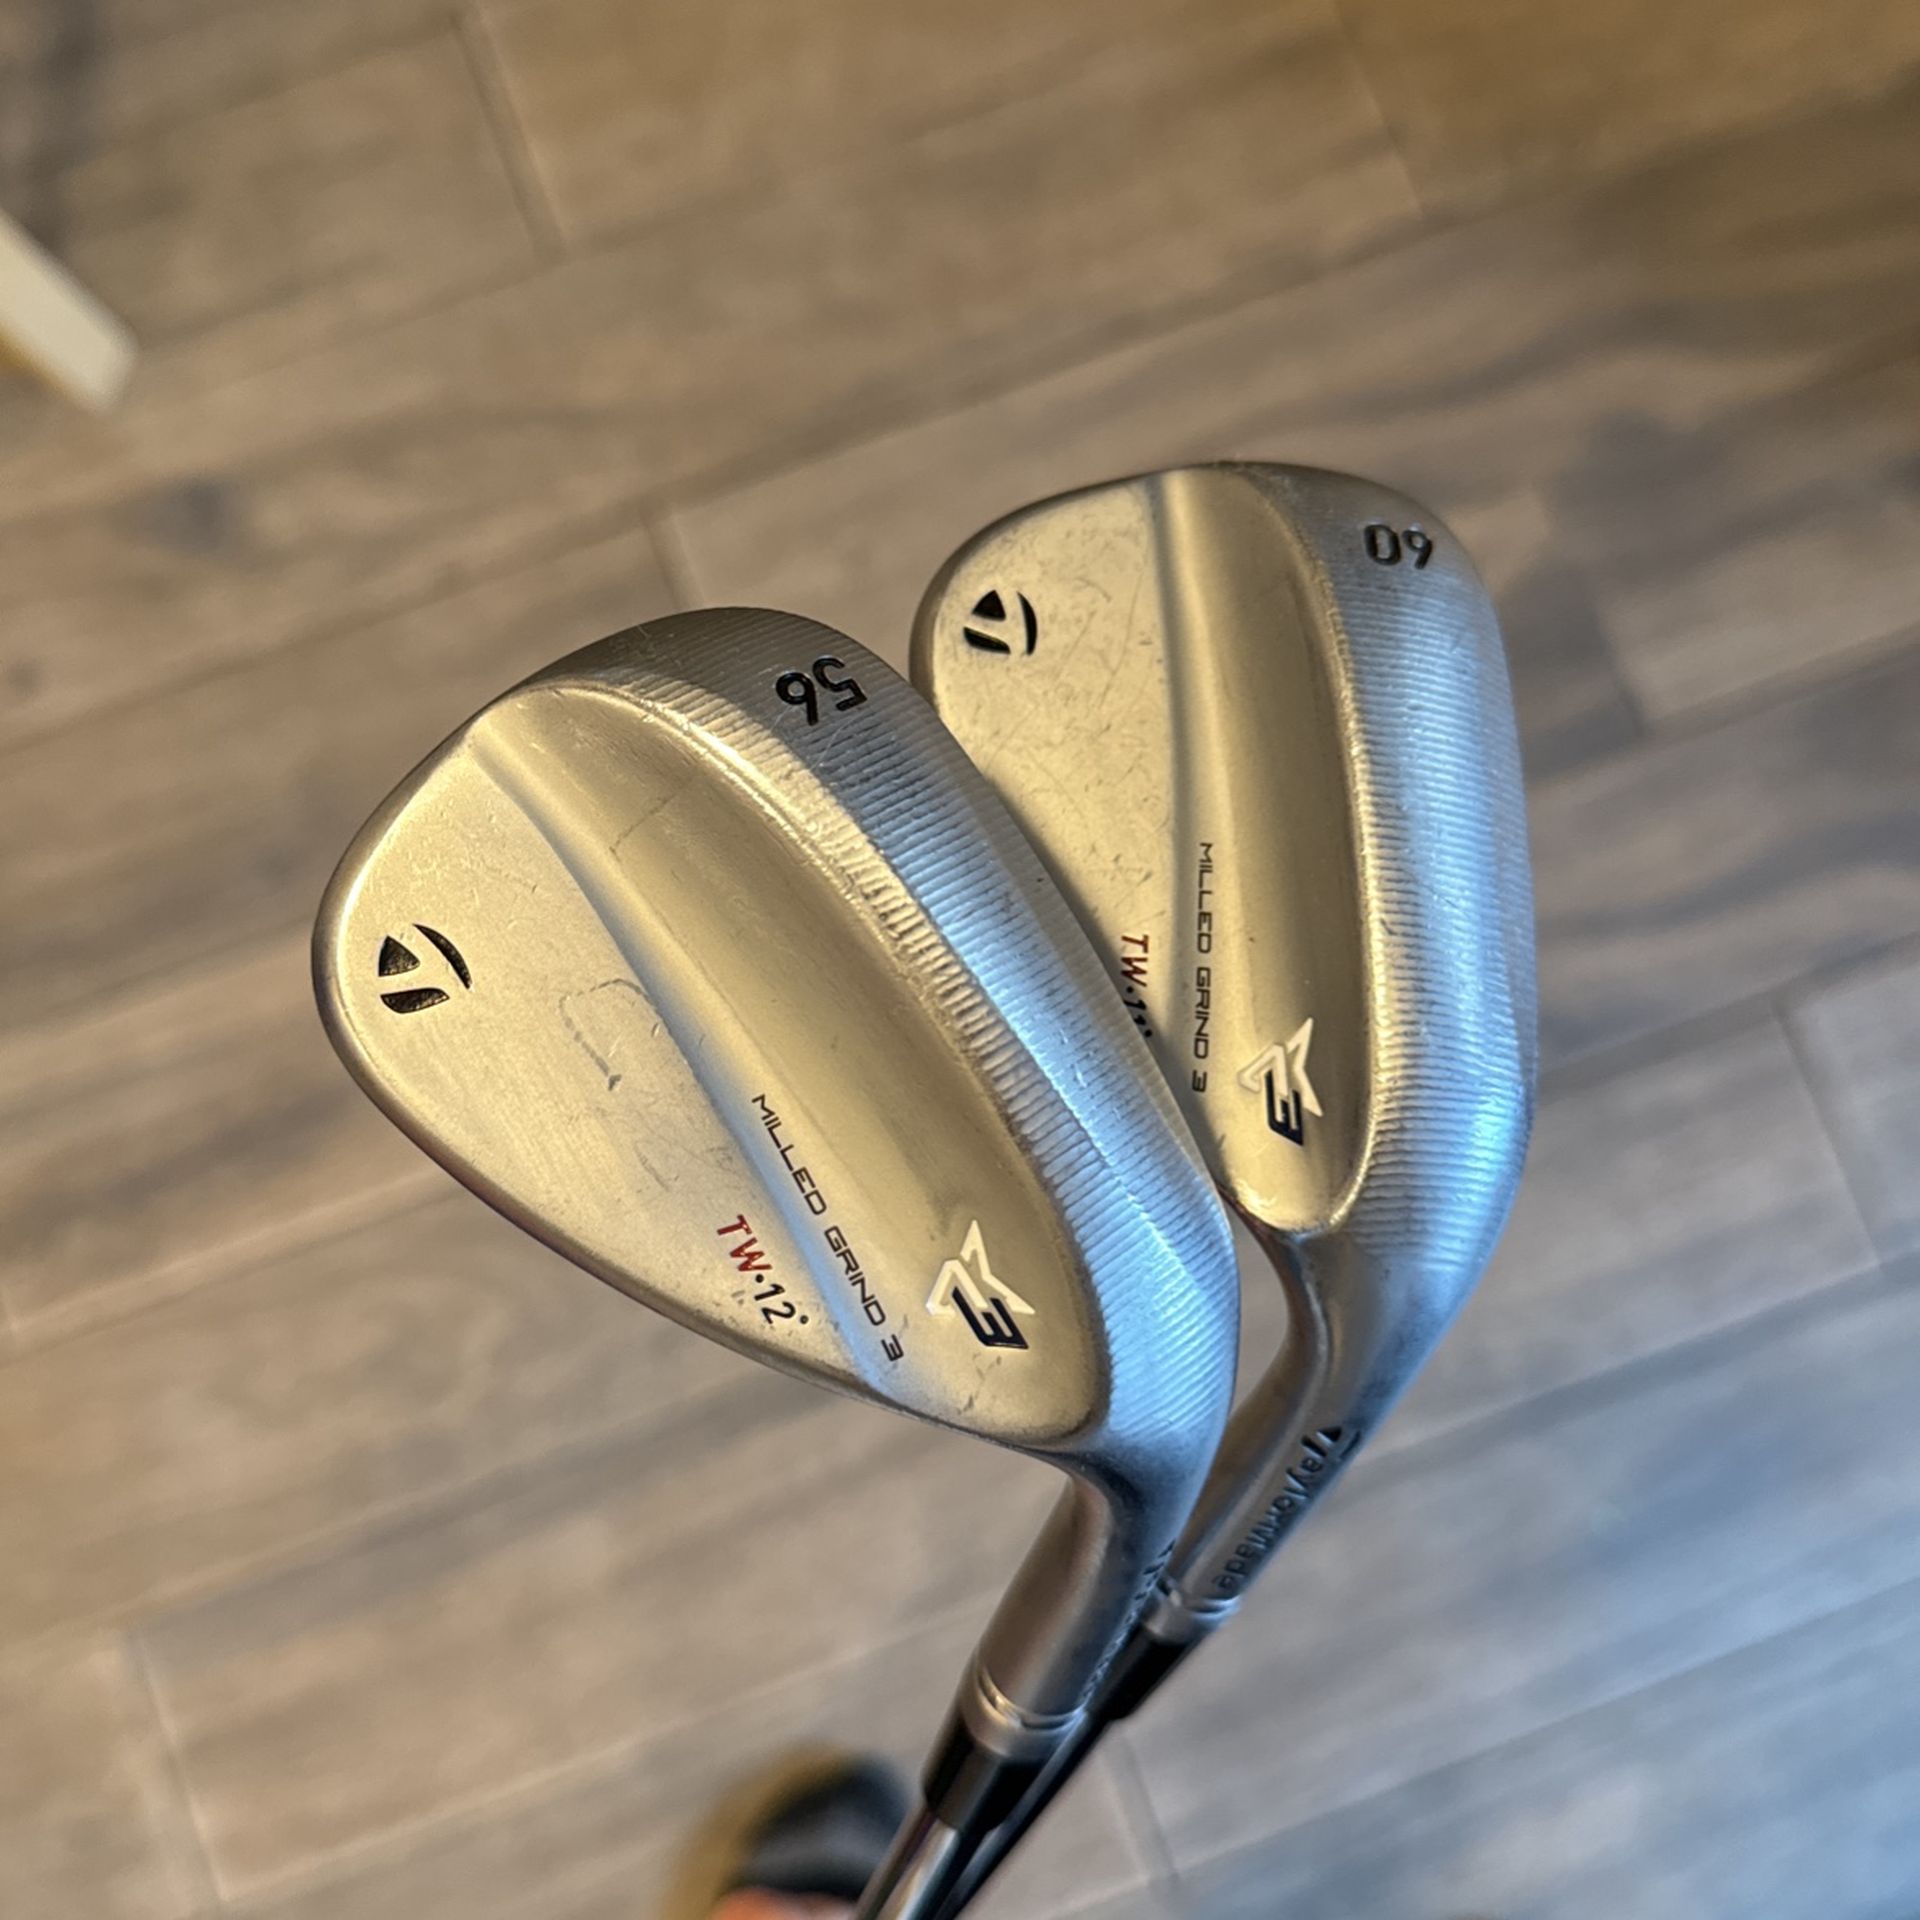 Golf clubs - Taylormade Mg3 Wedges TW Grind 56*, 60*